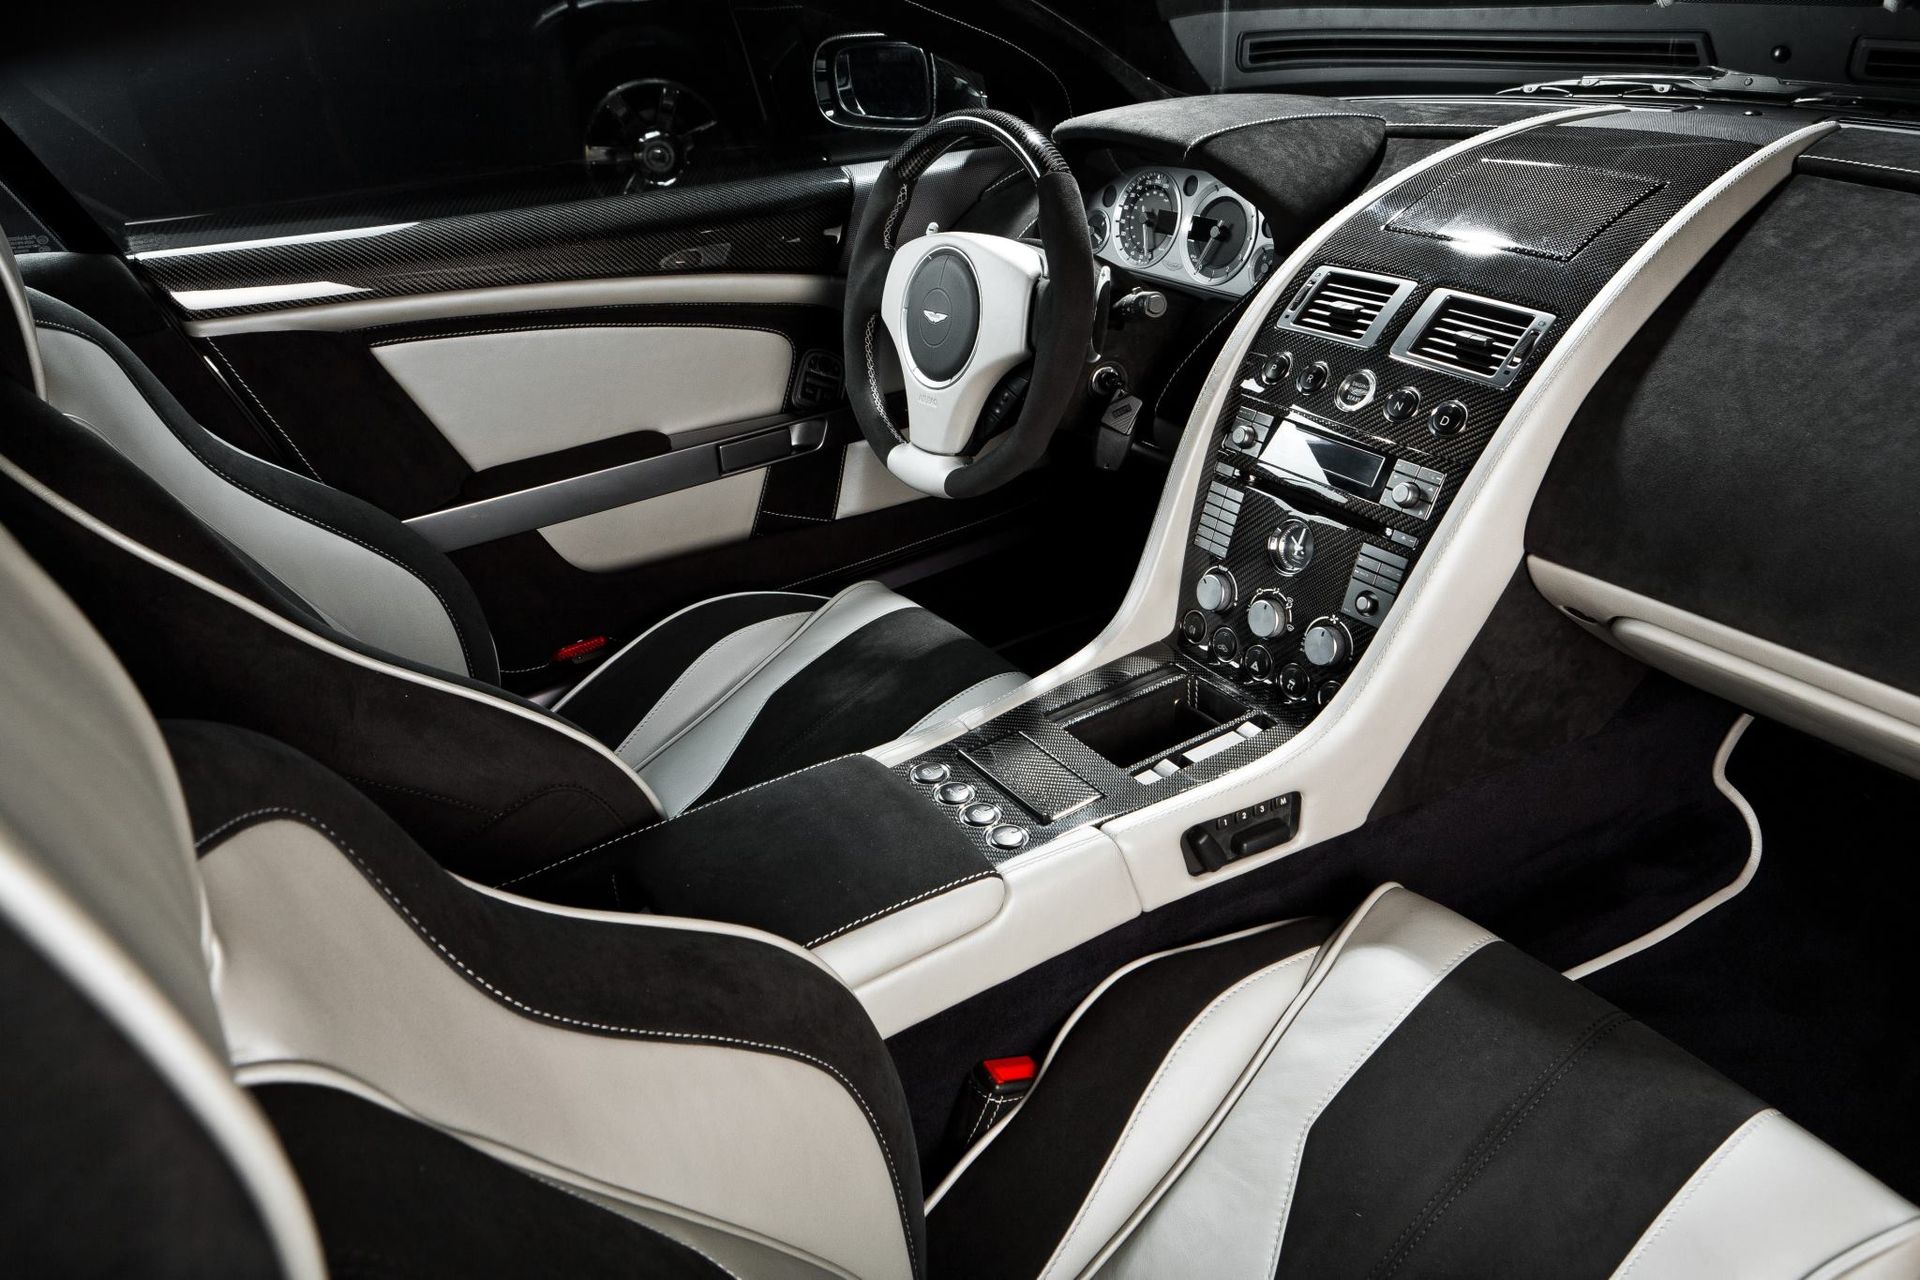 The interior of a black and white car with a steering wheel